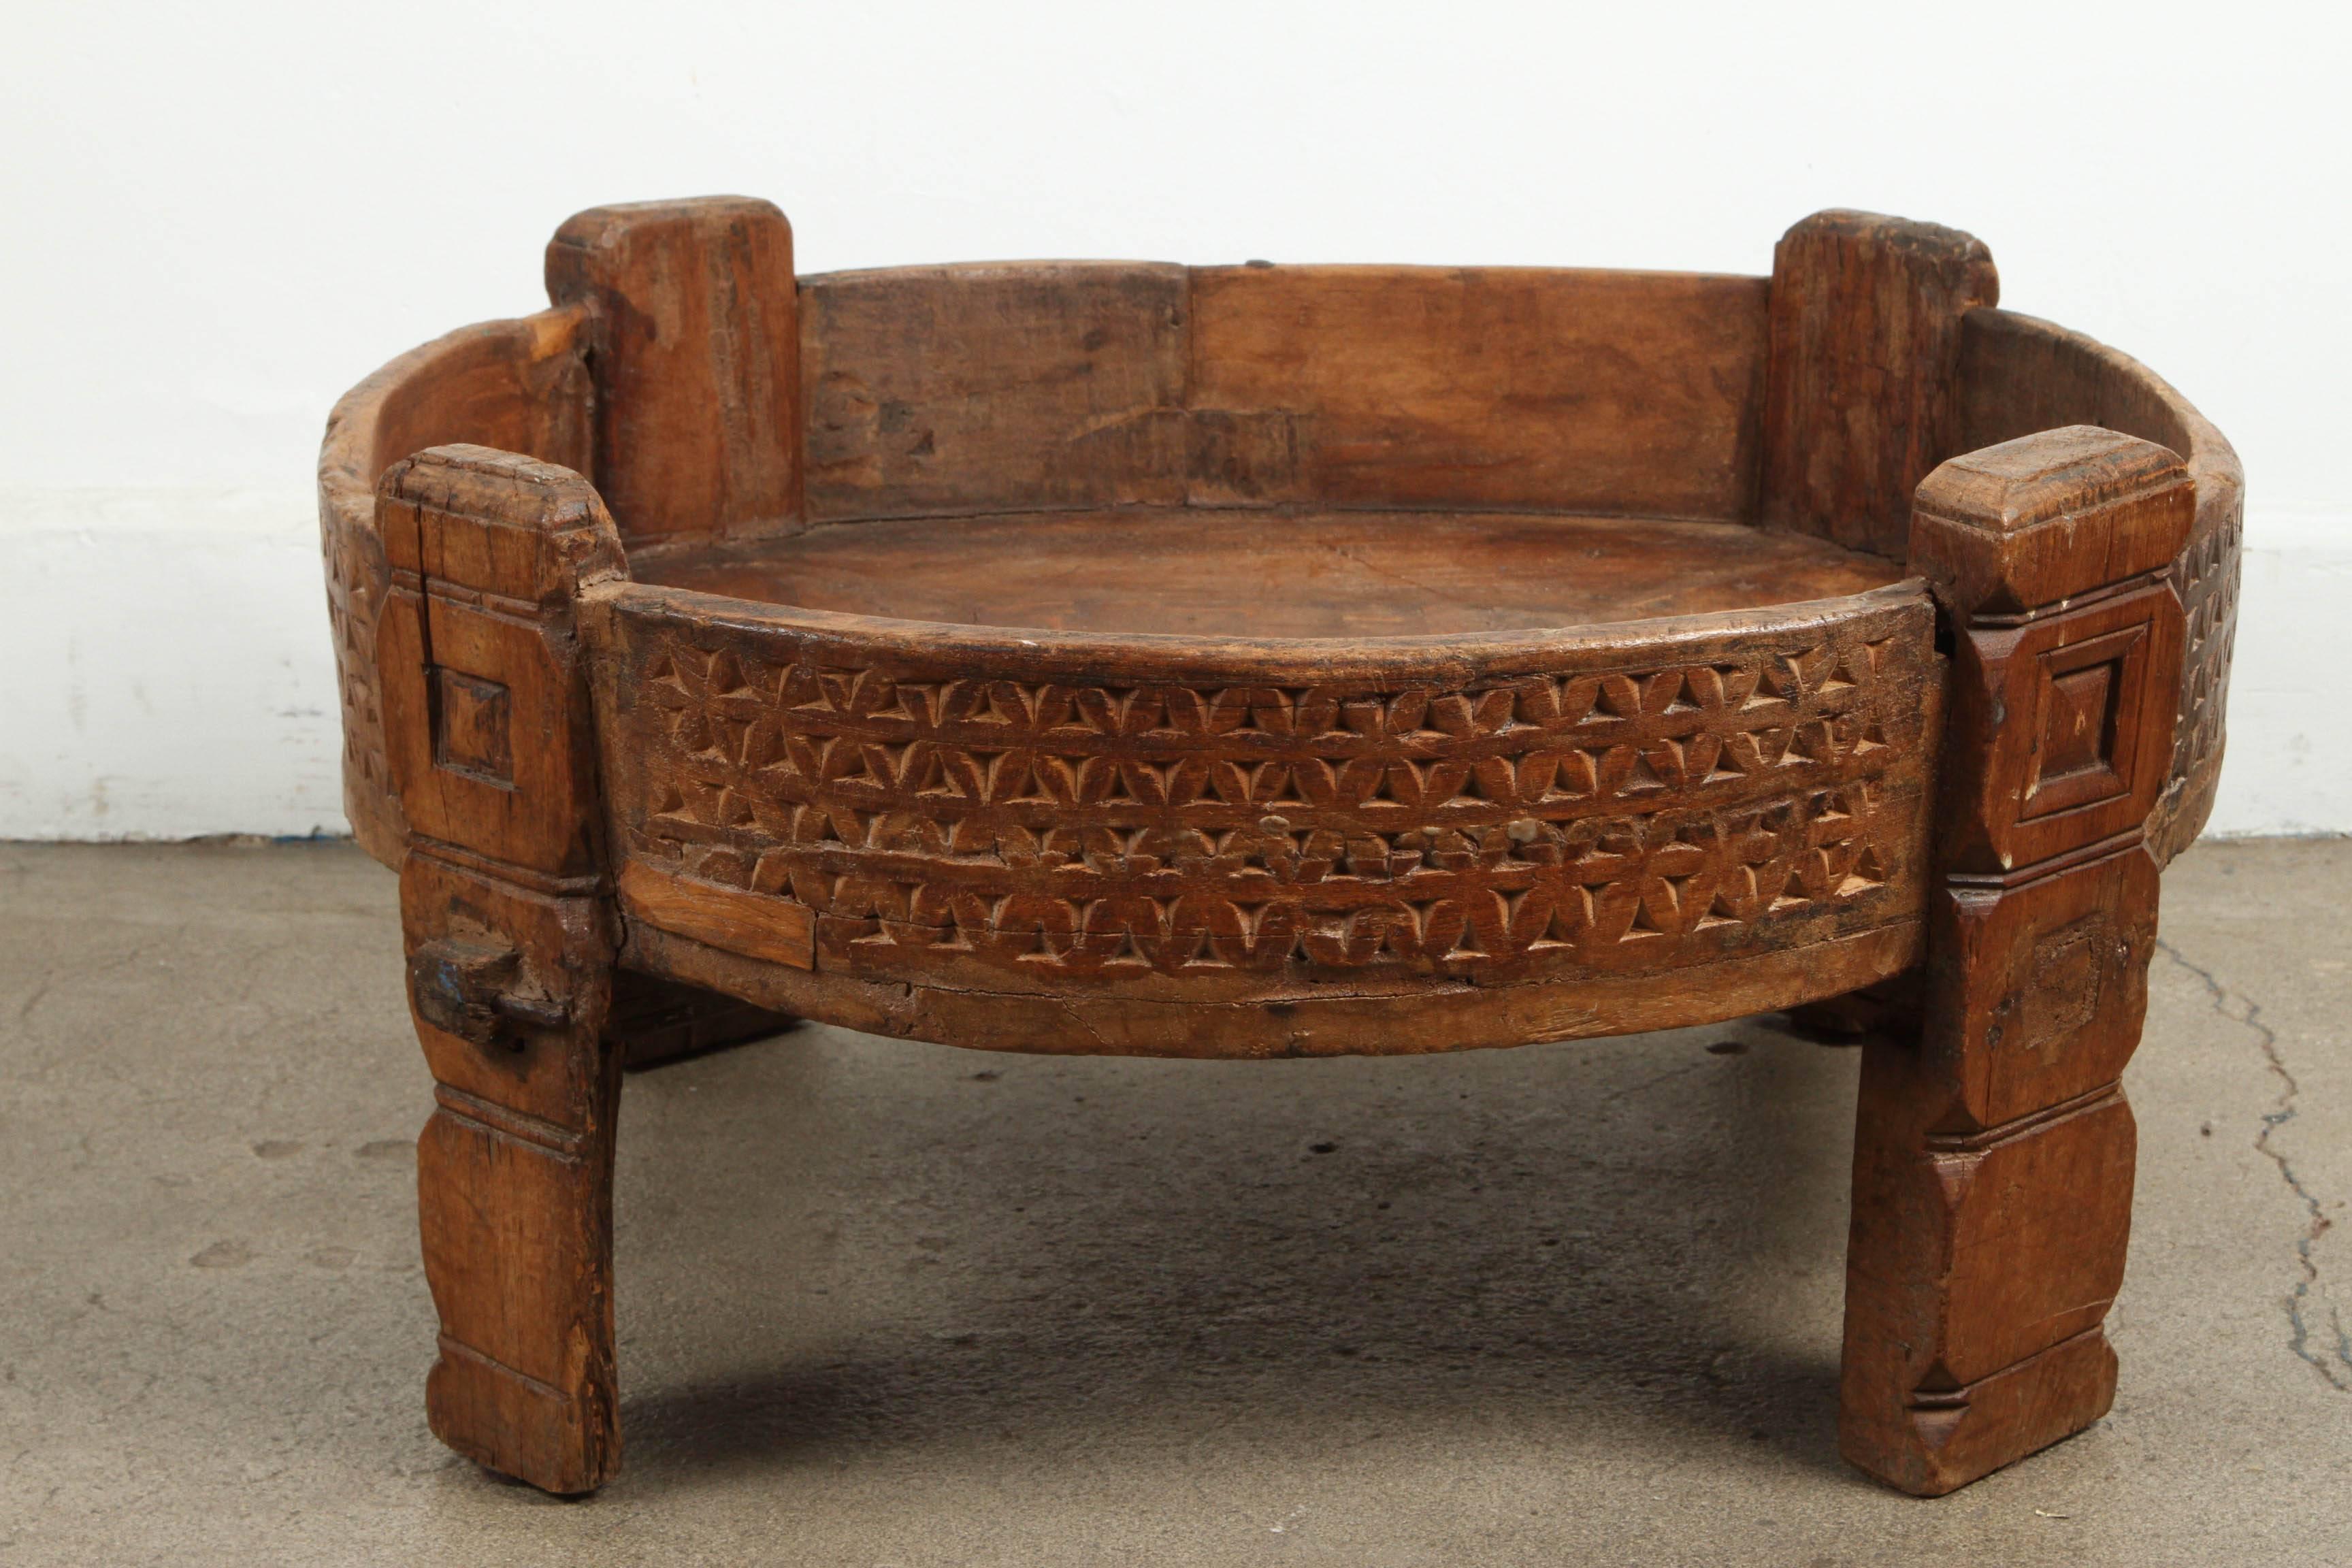 Great Moroccan round Tribal table, made of wood and iron, hand-carved with geometric African design.
Hand-crafted in Africa by the Berber tribes of Morocco.
Great to use indoor or outdoor.